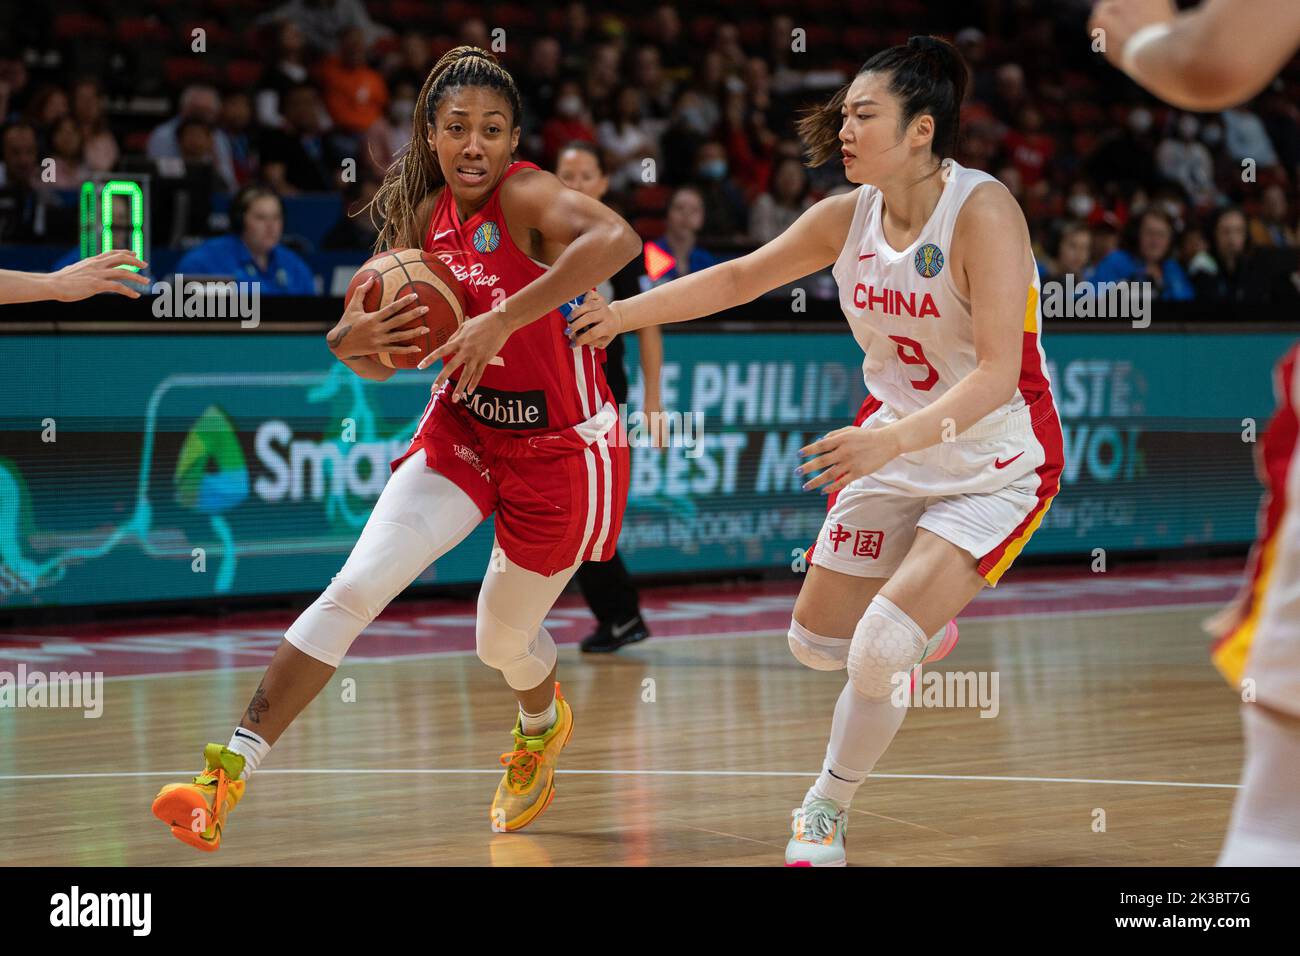 Sydney, Australia. 26th Sep, 2022. Arella Guirantes (22 Puerto Rico) drives to the basket defended by Li Meng (9 China) during the FIBA Womens World Cup 2022 game between China and Puerto Rico at the Sydney Superdome in Sydney, Australia. (Foto: Noe Llamas/Sports Press Photo/C - ONE HOUR DEADLINE - ONLY ACTIVATE FTP IF IMAGES LESS THAN ONE HOUR OLD - Alamy) Credit: SPP Sport Press Photo. /Alamy Live News Stock Photo